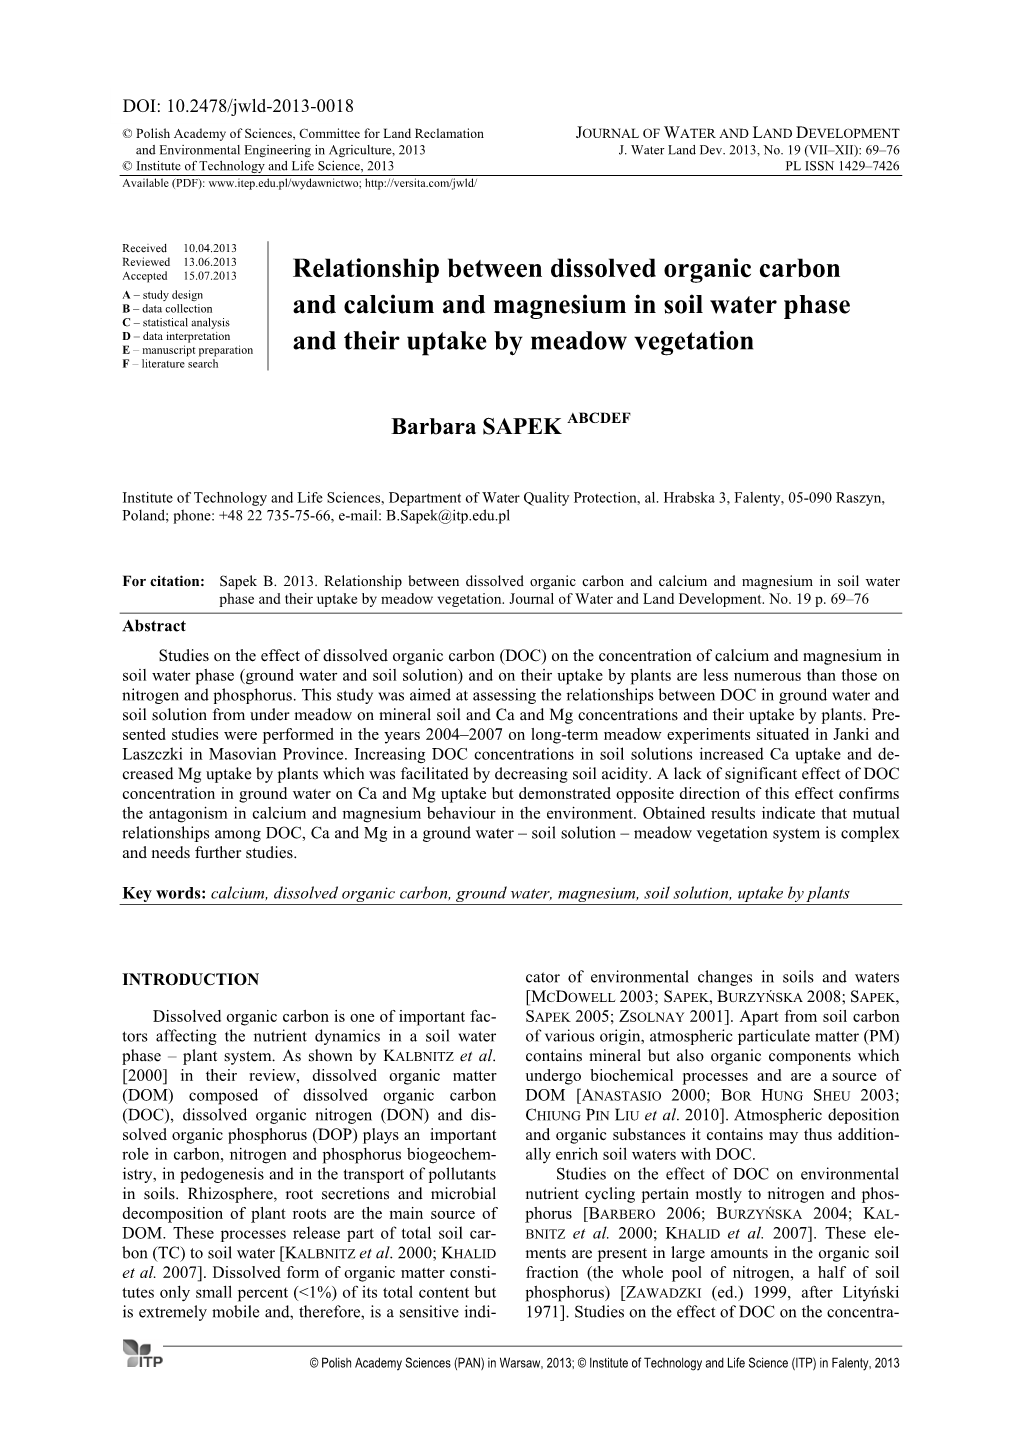 Relationship Between Dissolved Organic Carbon and Calcium and Magnesium in Soil Water Phase and Their Uptake by Meadow Vegetation